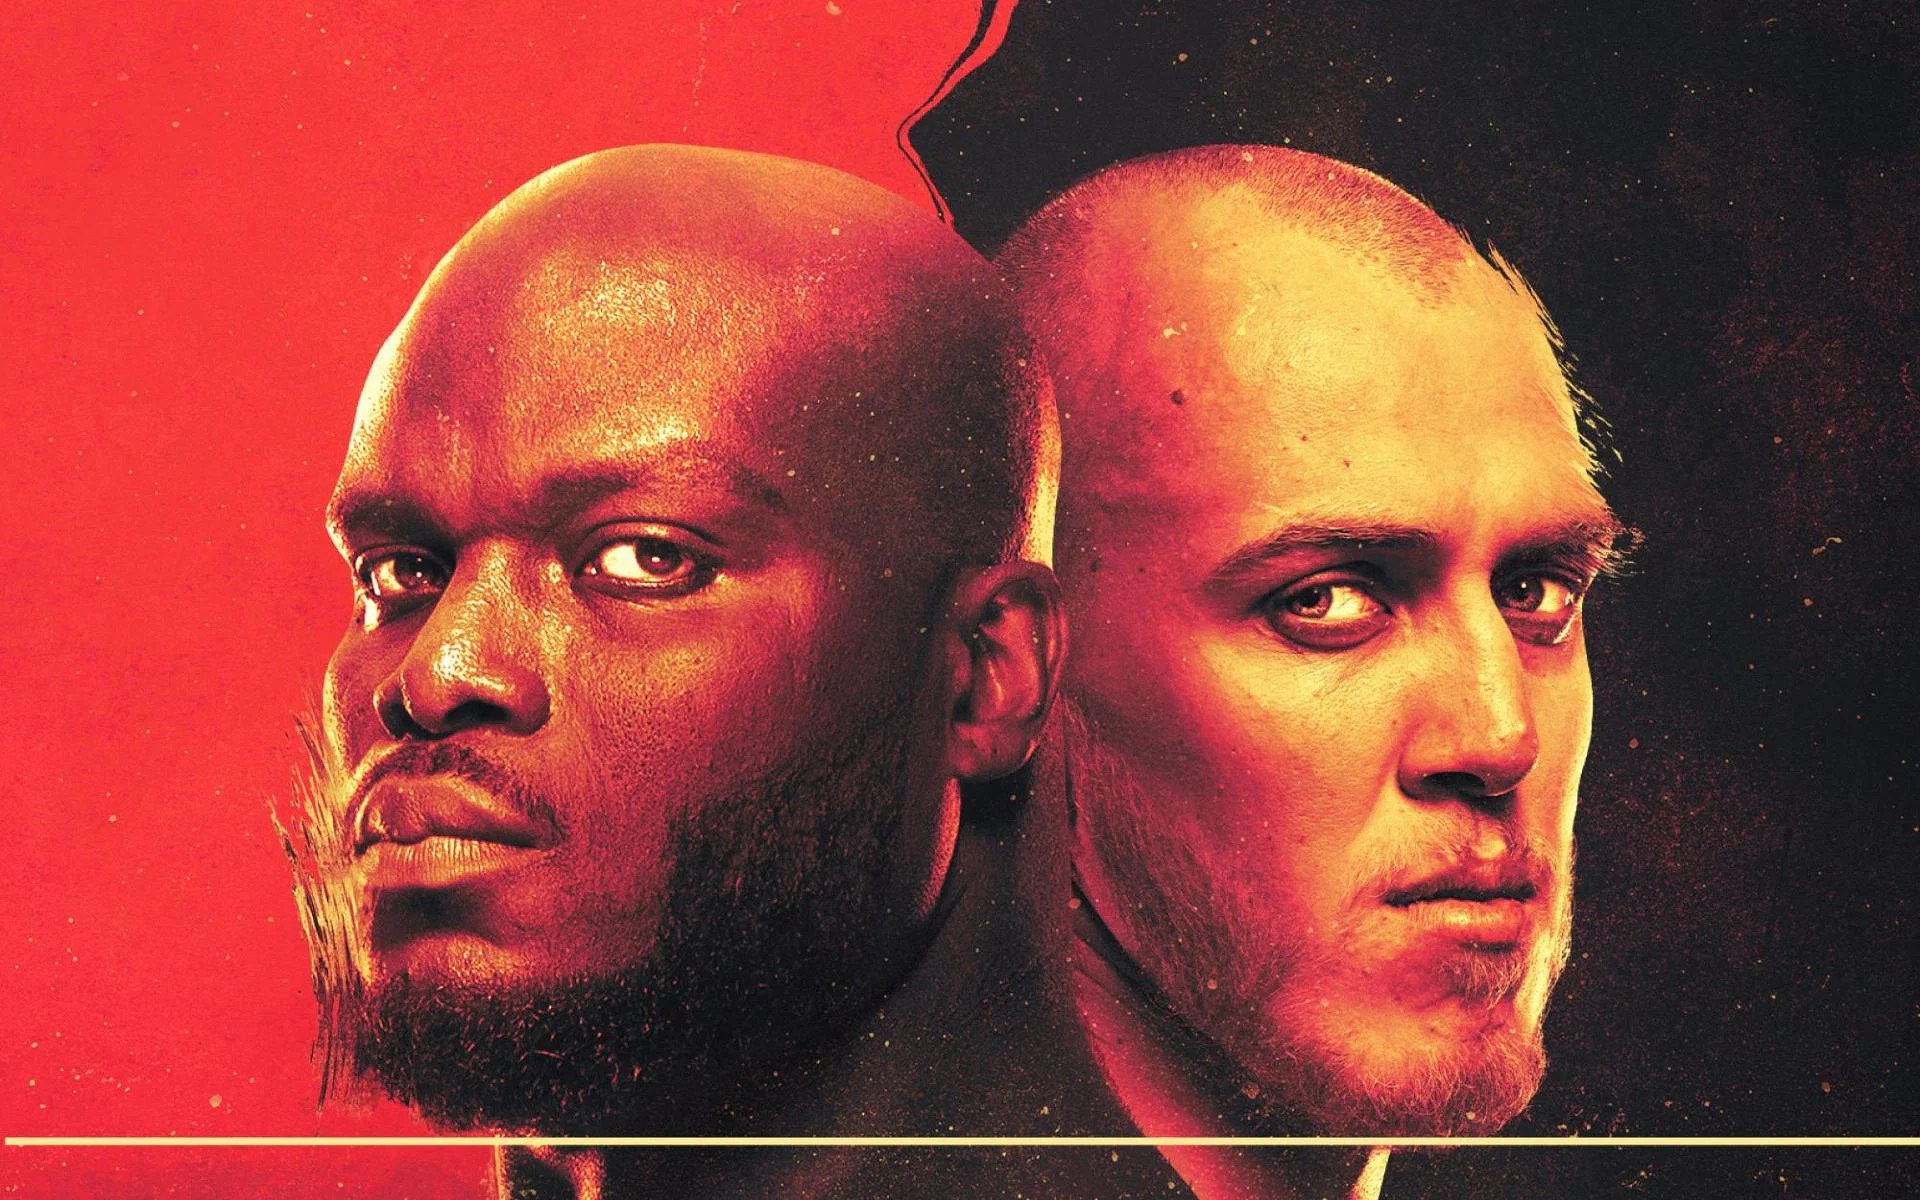 UFC Fight Night India: Derrick Lewis vs Sergey Spivac: How to watch Lewis vs Spivac in India live? - Time, date and full fight card 